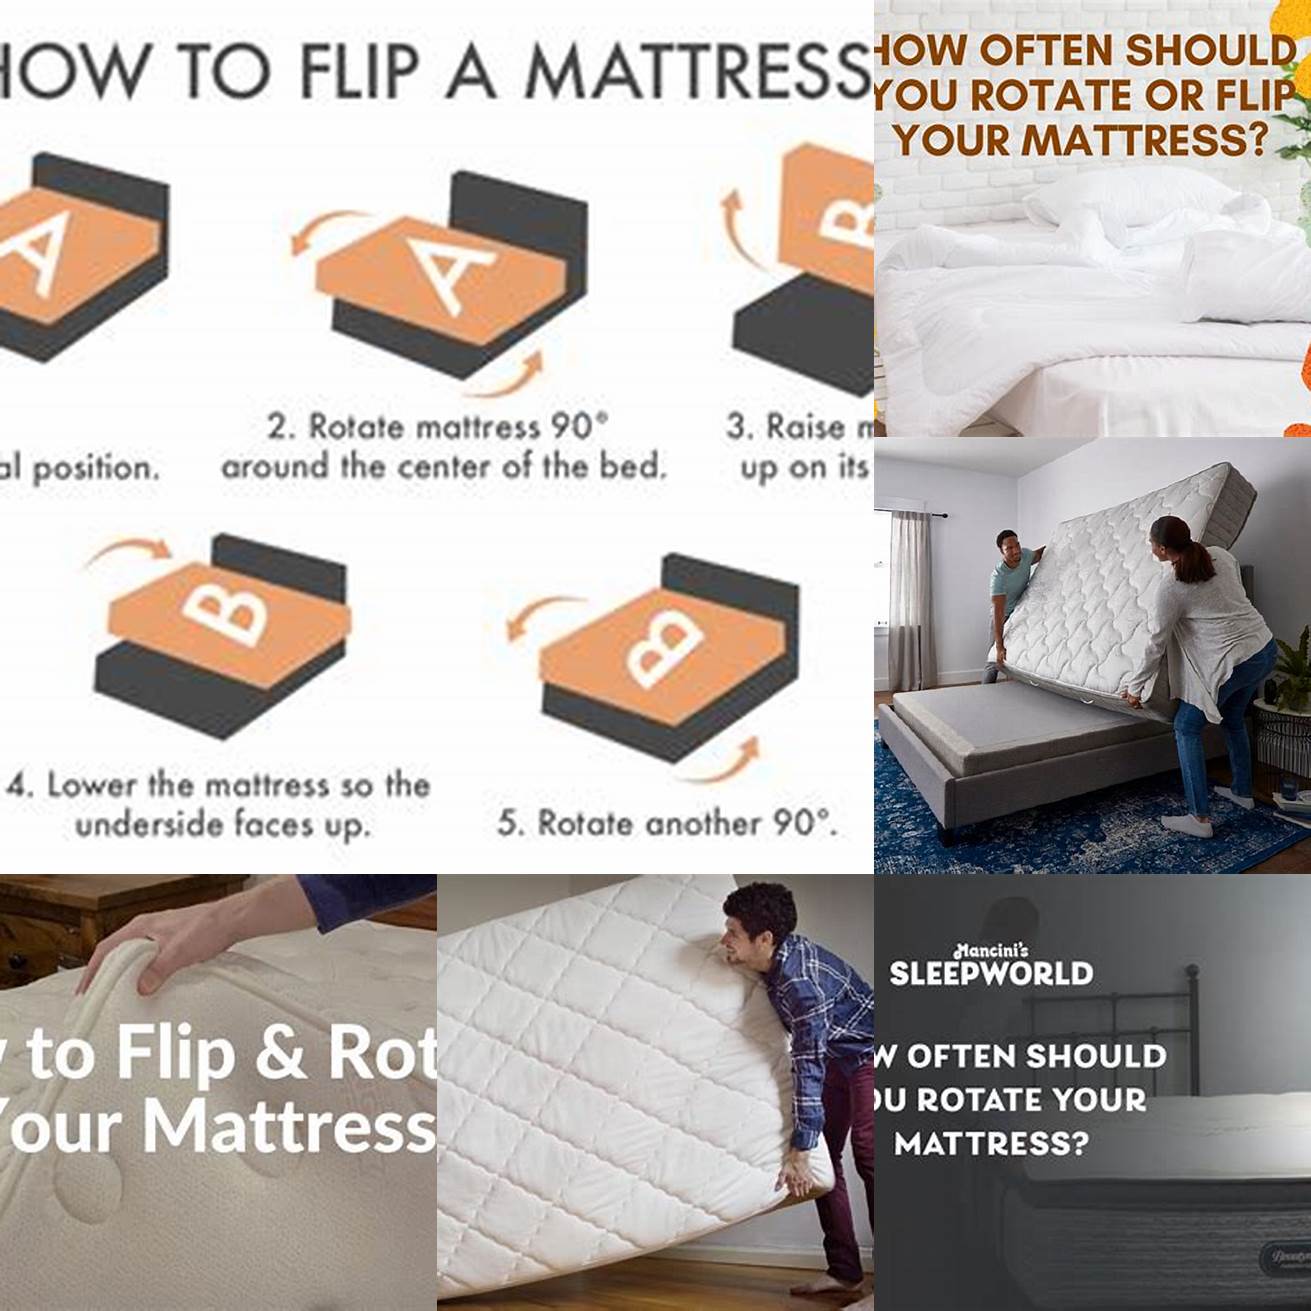 Rotating and flipping your mattress